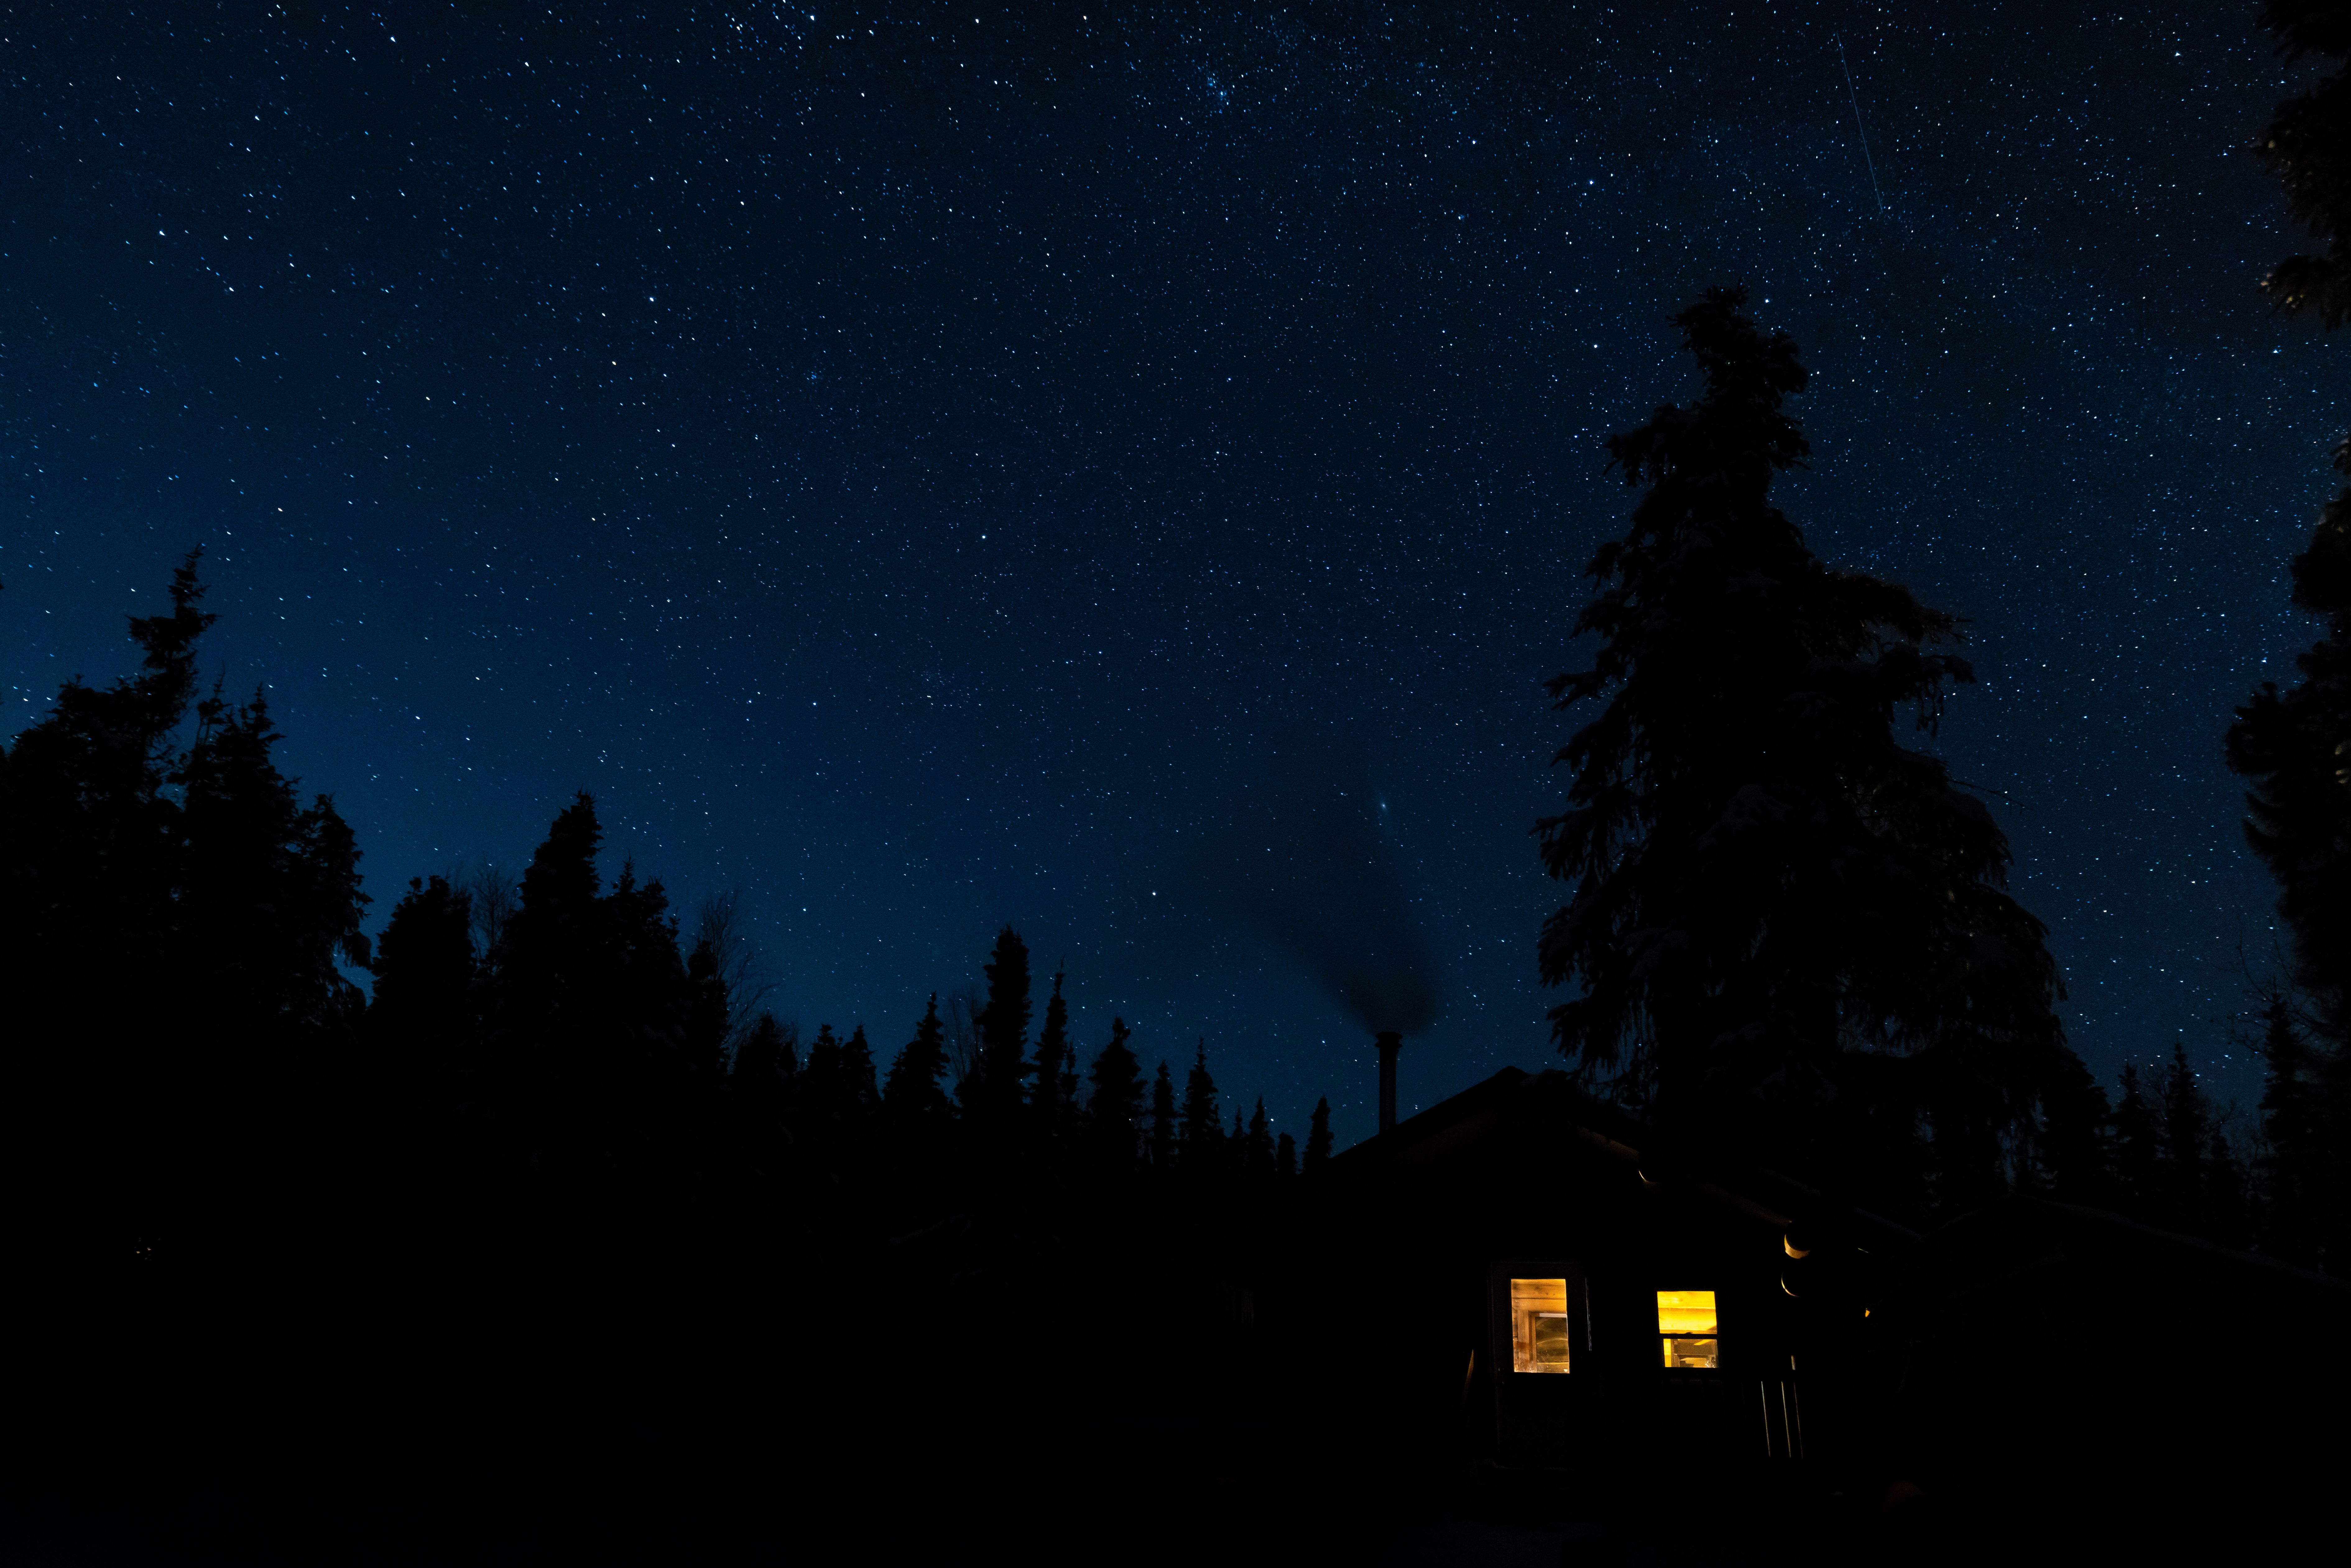 small house, trees, night, dark, shine, light, forest, silhouettes, lodge cellphone